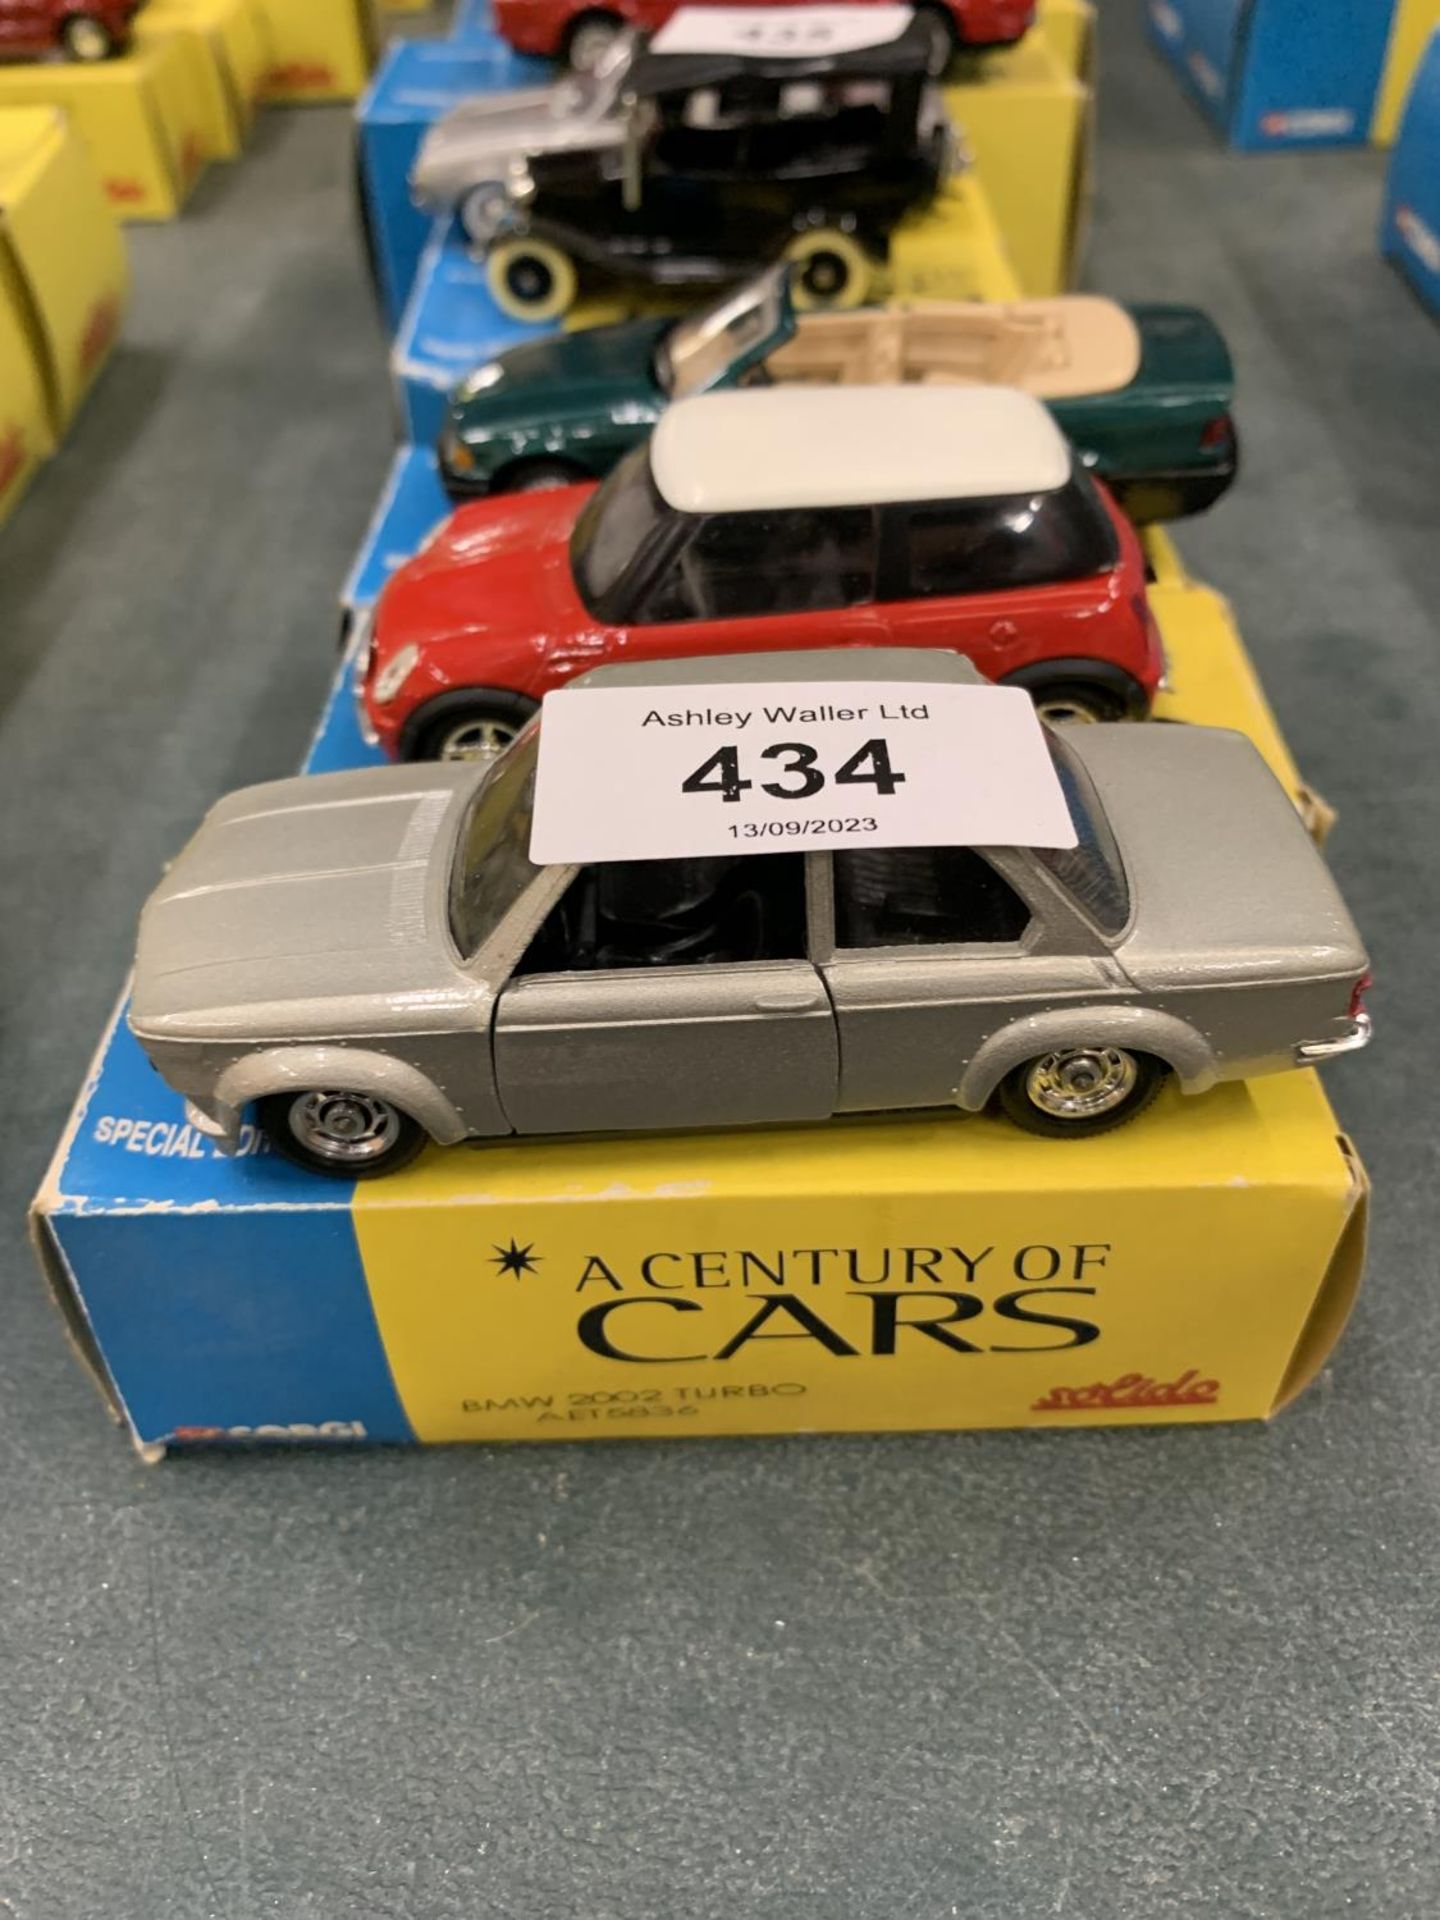 THREE BOXED CORGI 'A CENTURY OF CARS' TO INCLUDE A BMW 3 SERIES, A BMW 2002 TURBO AND A MINI - Image 3 of 3